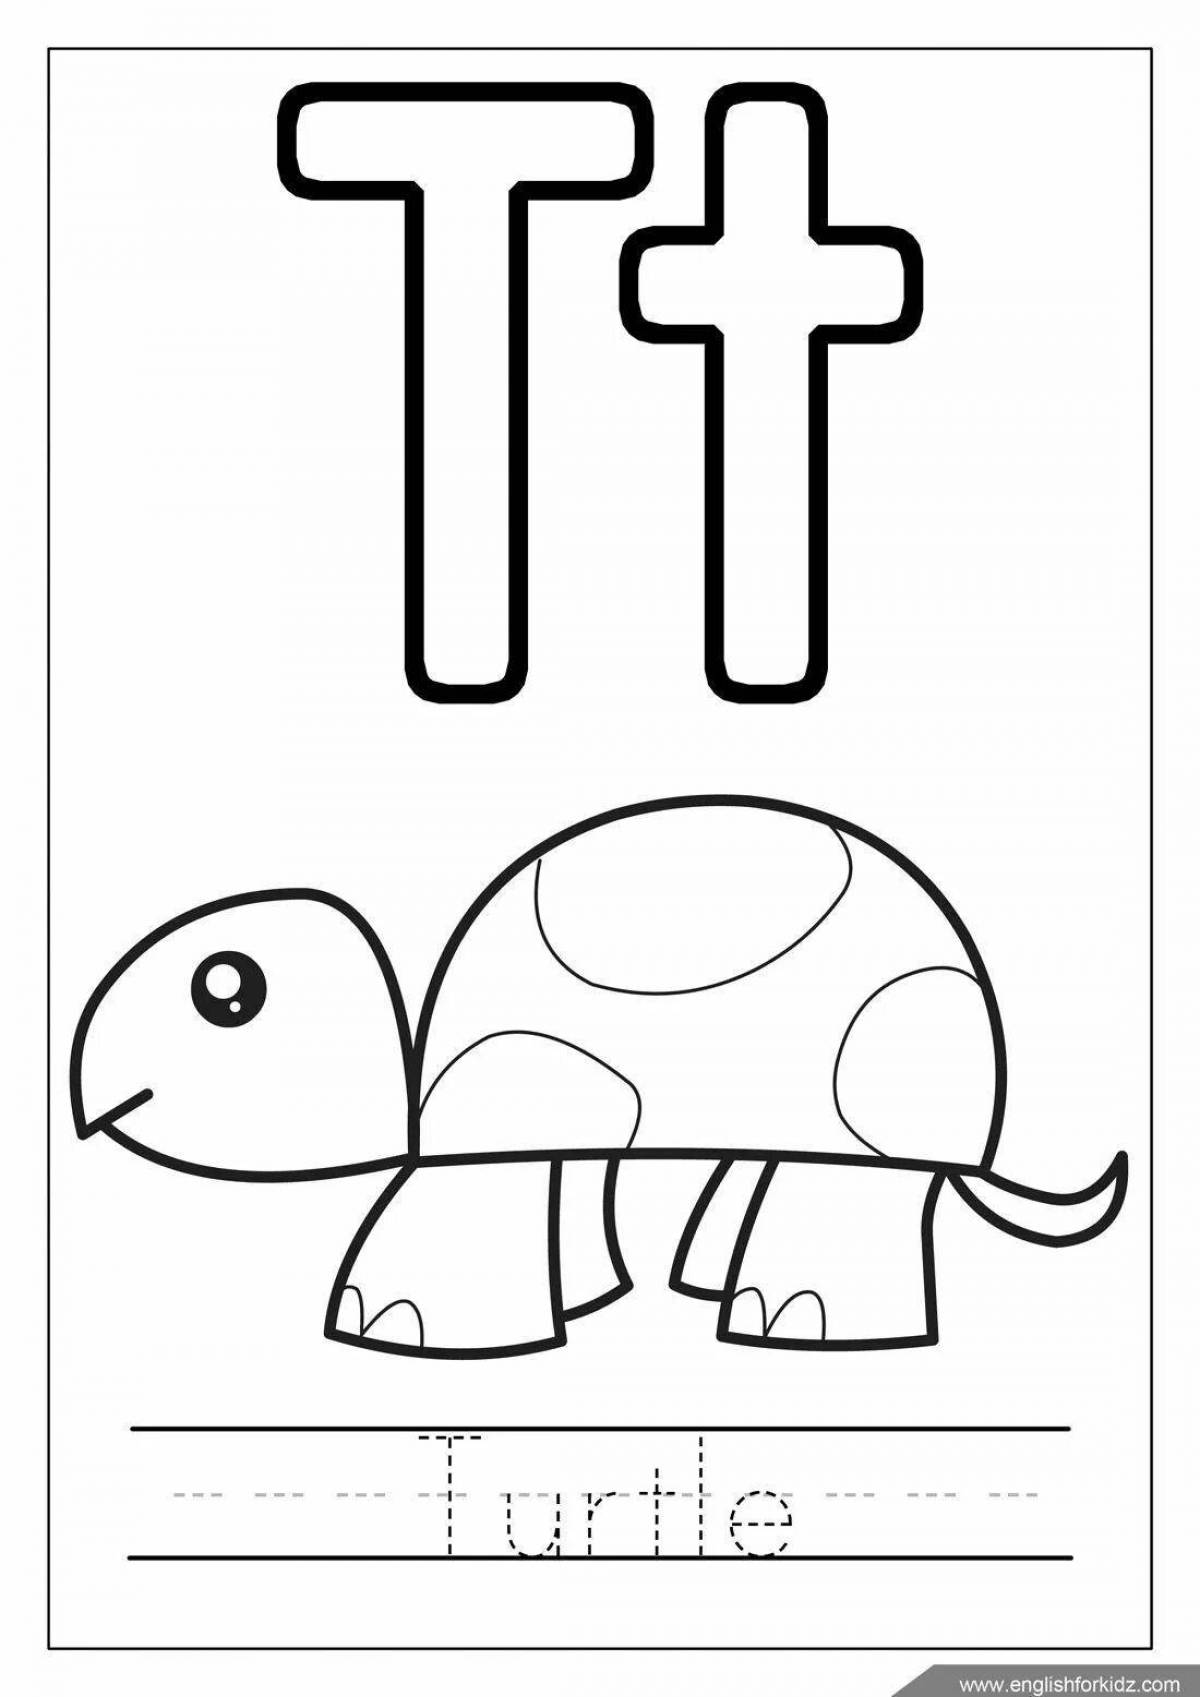 Bright letter t coloring book for preschoolers